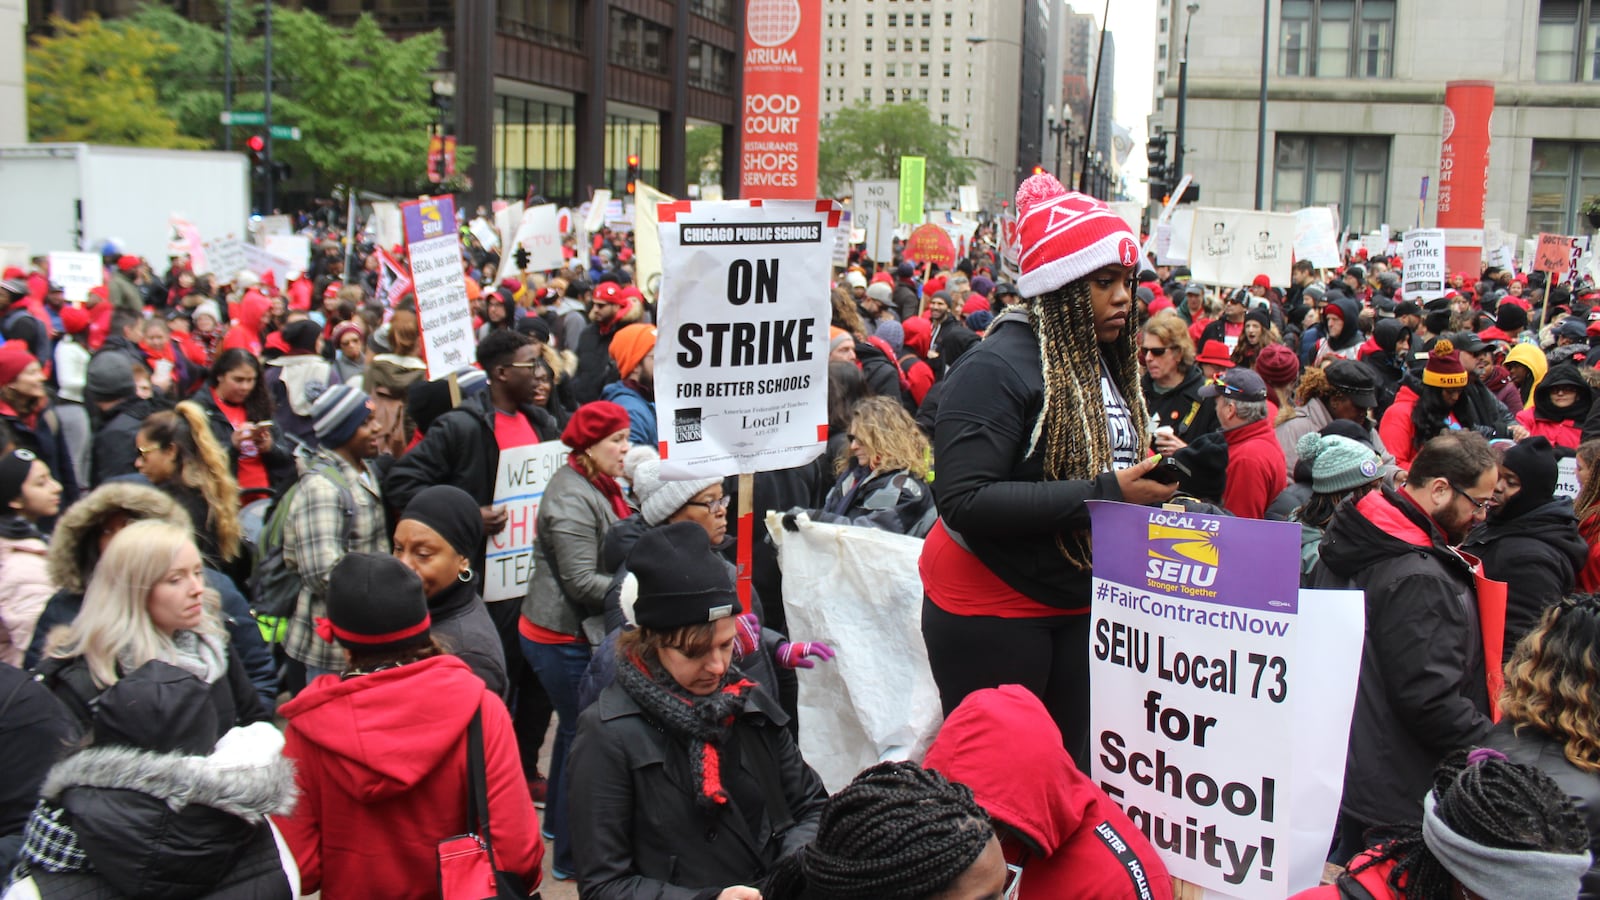 A week into their 11-day strike, Chicago teachers and supporters rallied on Oct. 23 to press their demands.